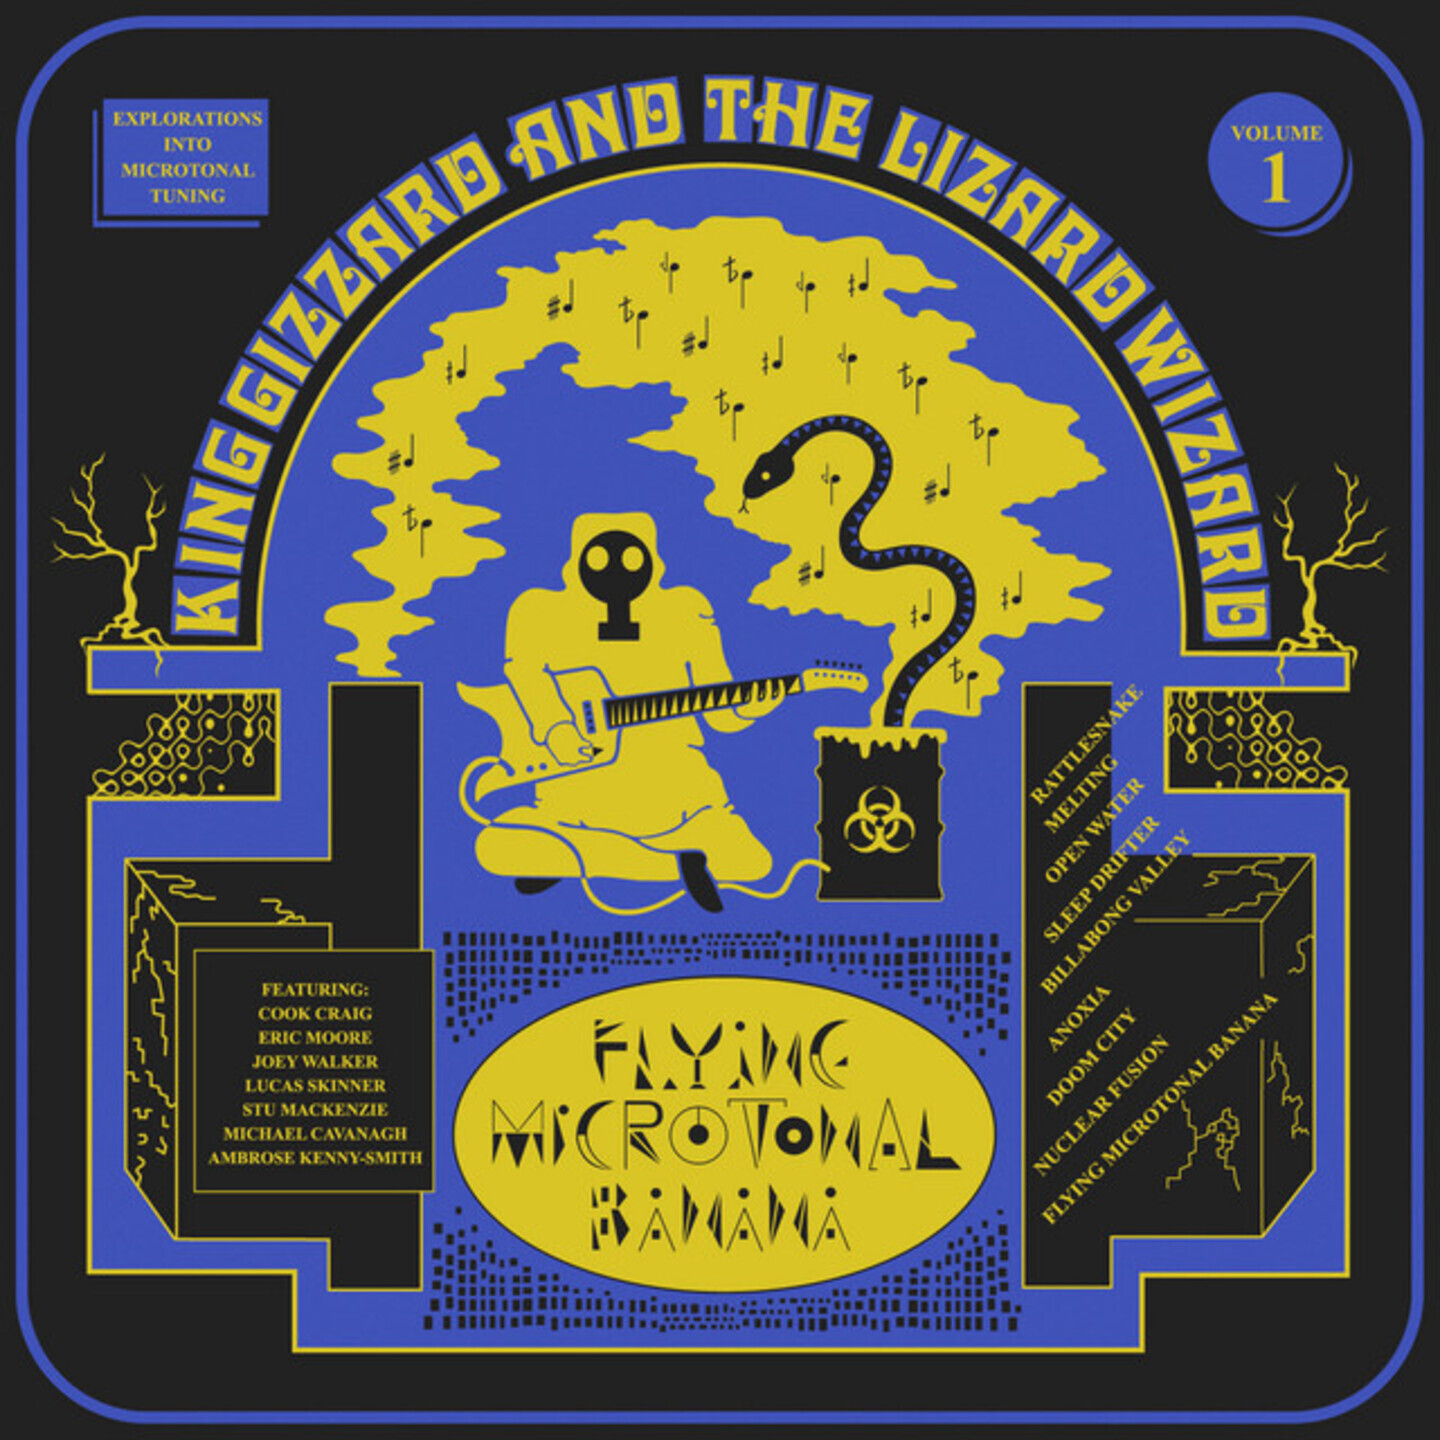 KING GIZZARD AND THE LIZARD WIZARD - Flying Microtonal Banana LP Flying Microtonal Banana Lucky Rainbow Eco mix vinyl